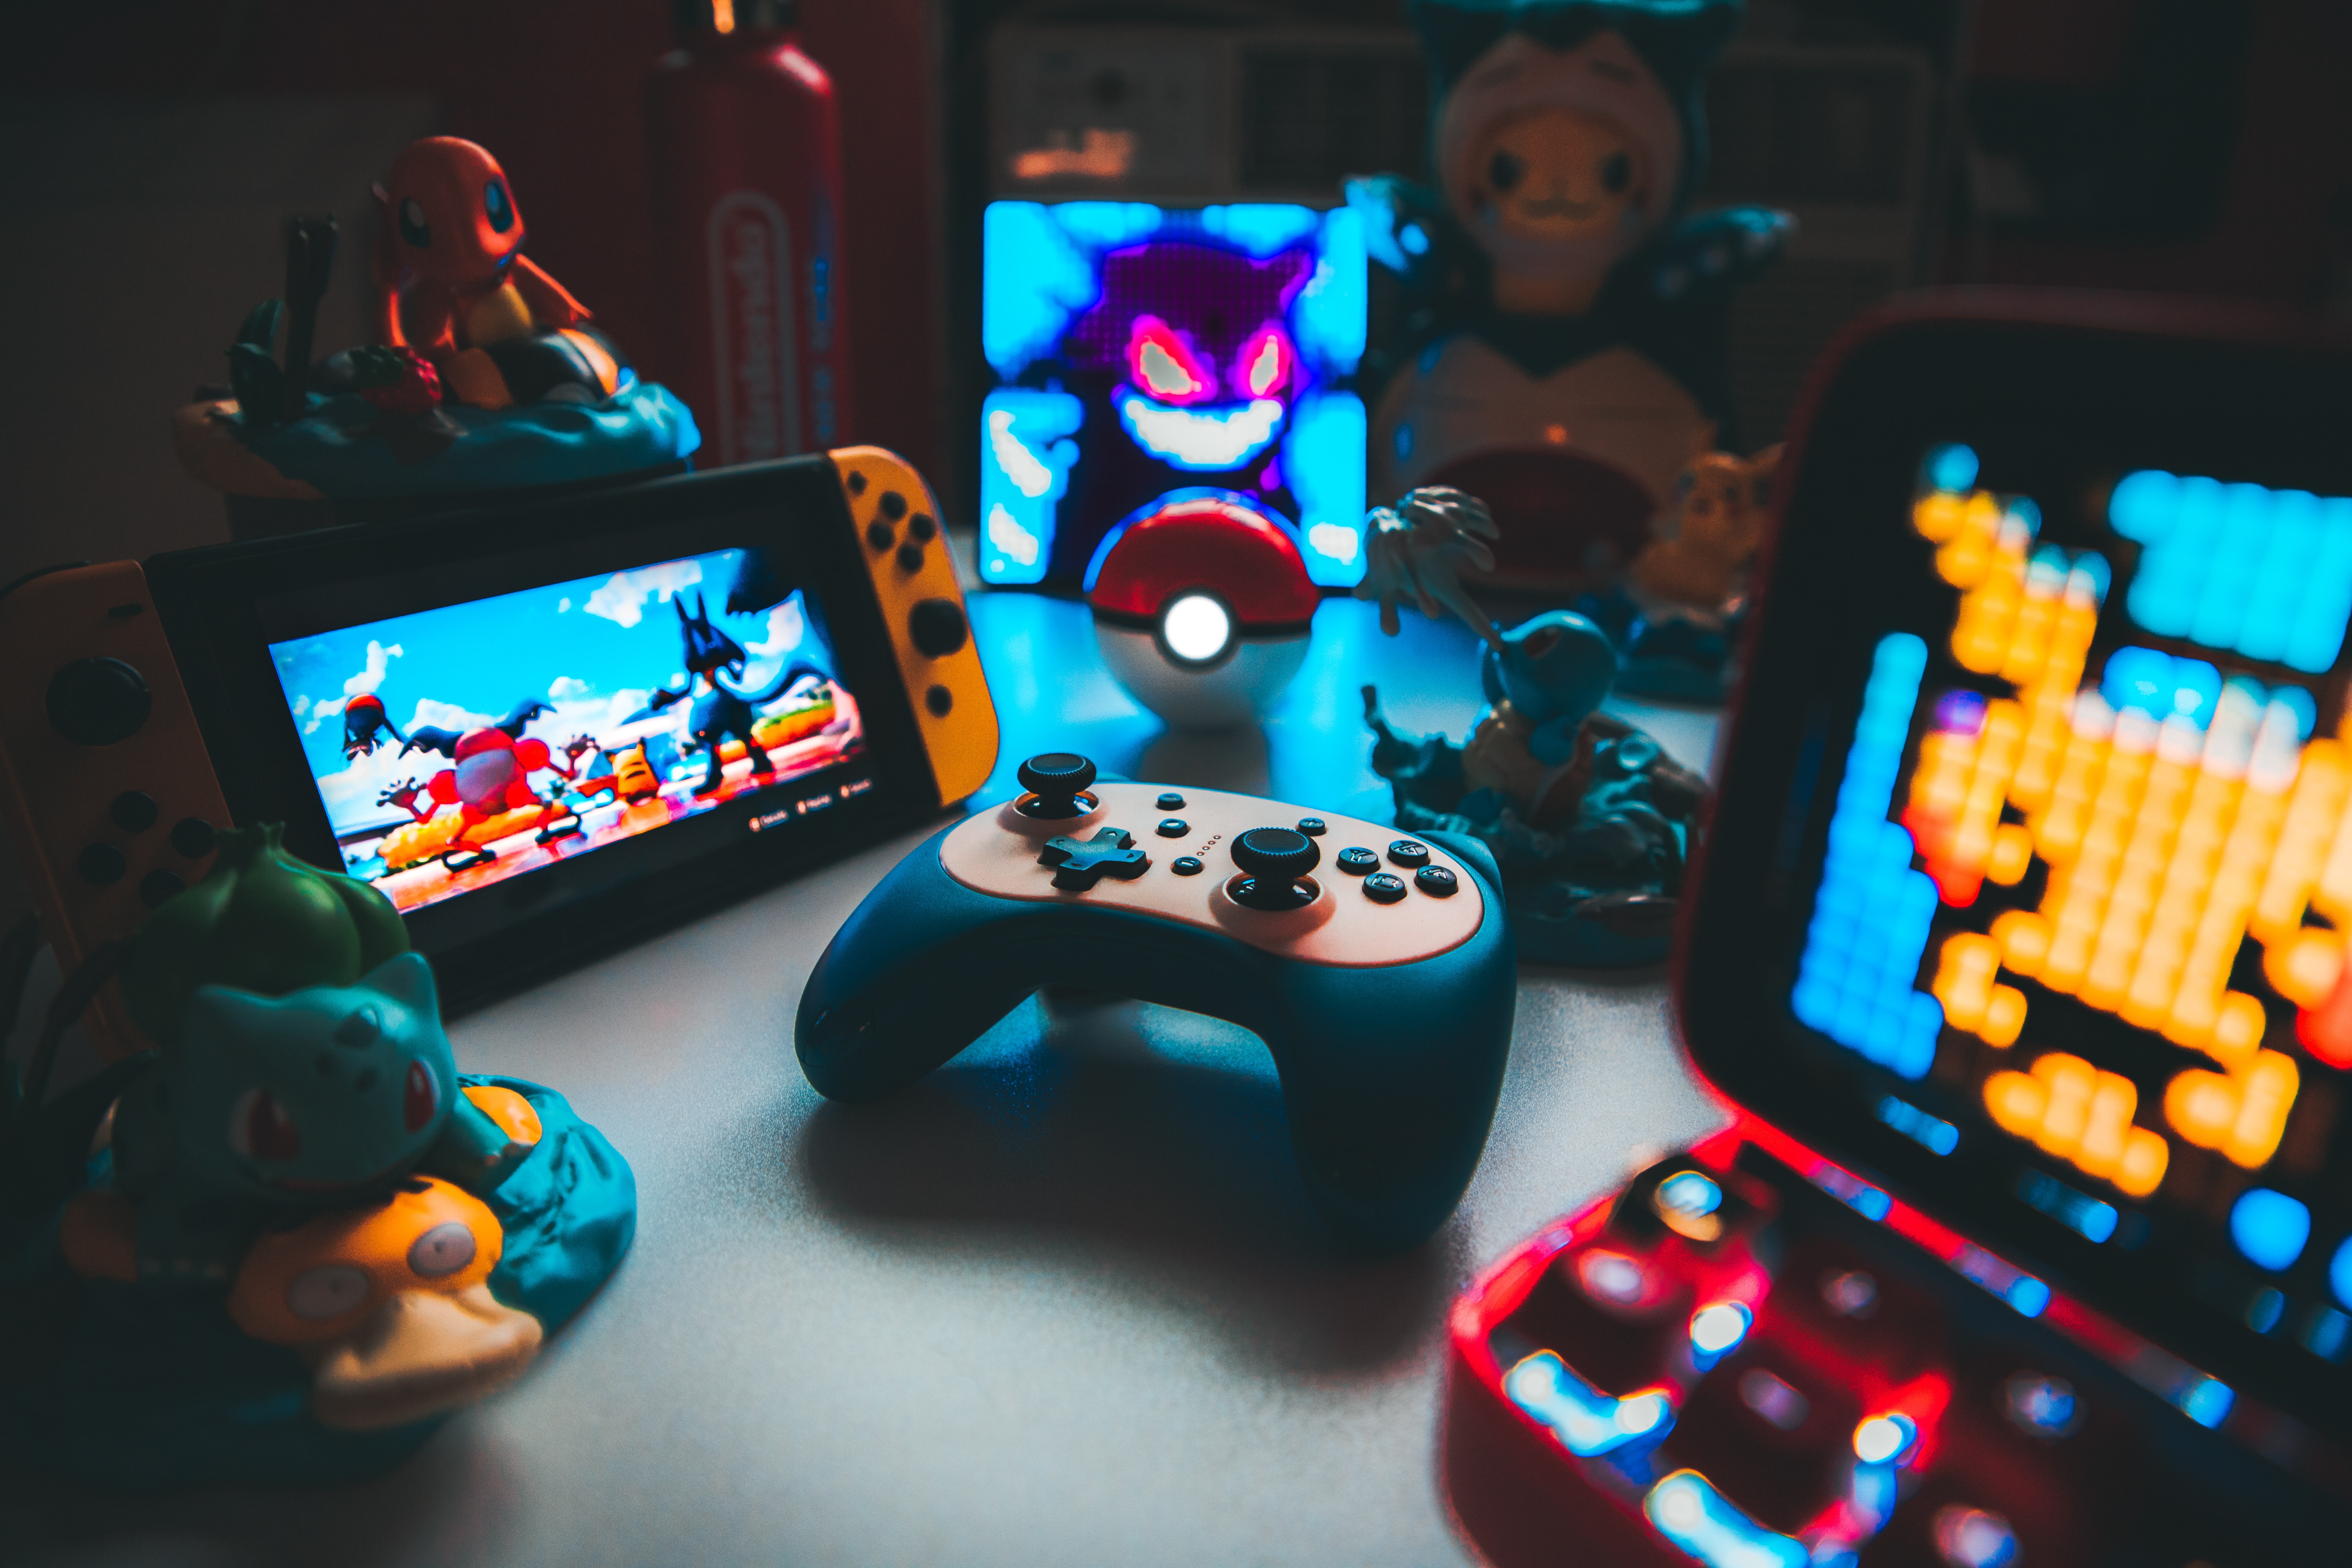 Games paraphernalia on a table - a console in the middle, a Nintendo Switch next to it, both surrounded by Pokemon characters